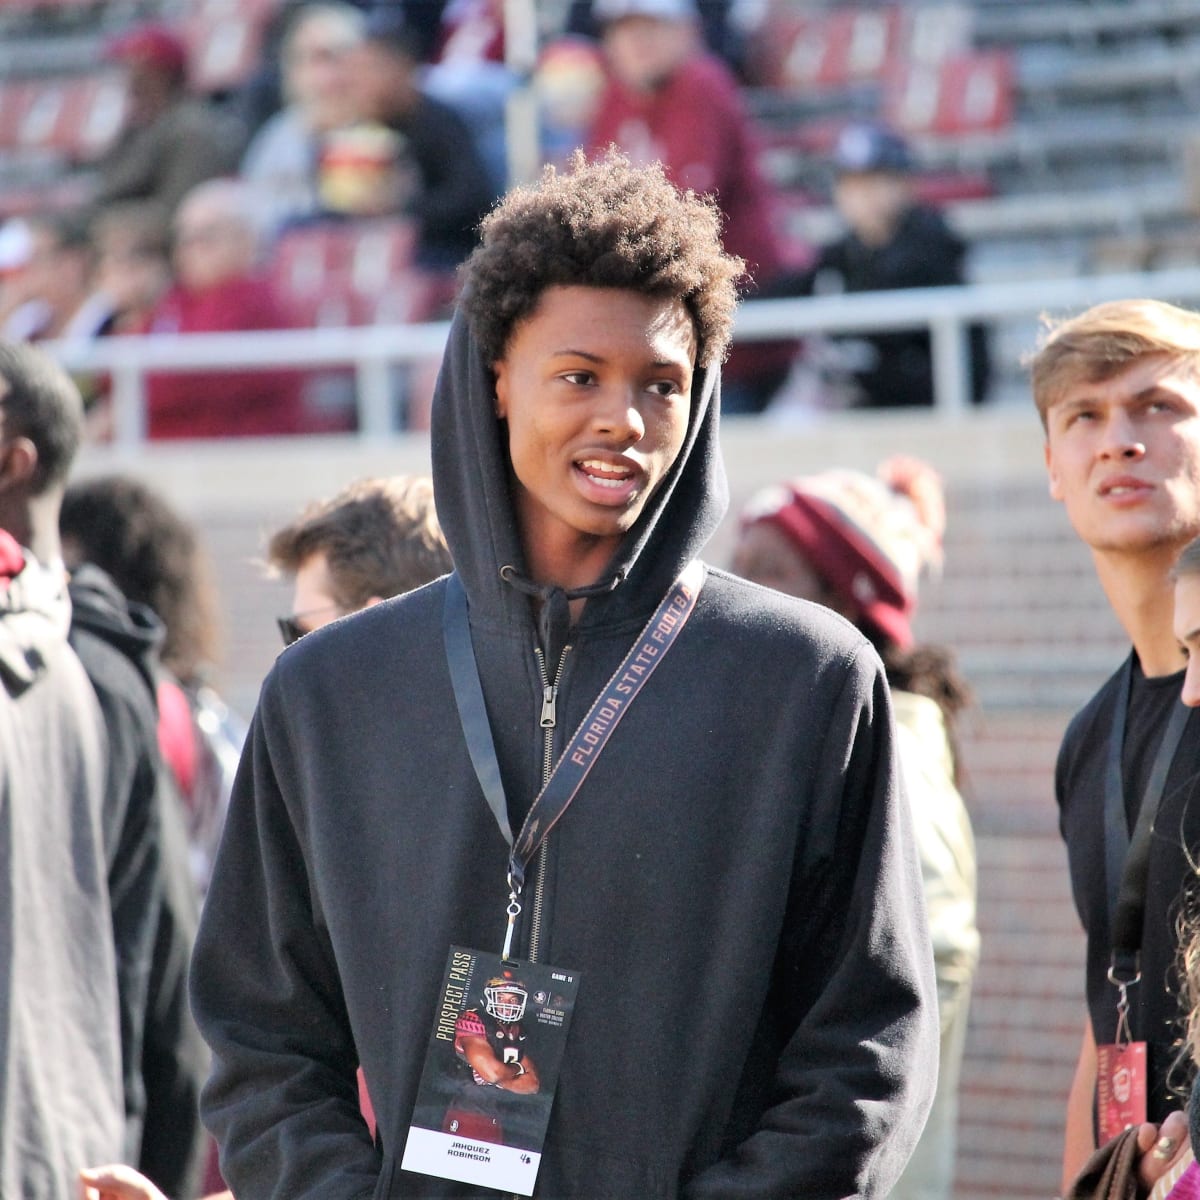 Jahquez Robinson had "problems" with Saban's staff at Alabama before CU - Sports Illustrated Colorado Buffaloes News, Analysis and More